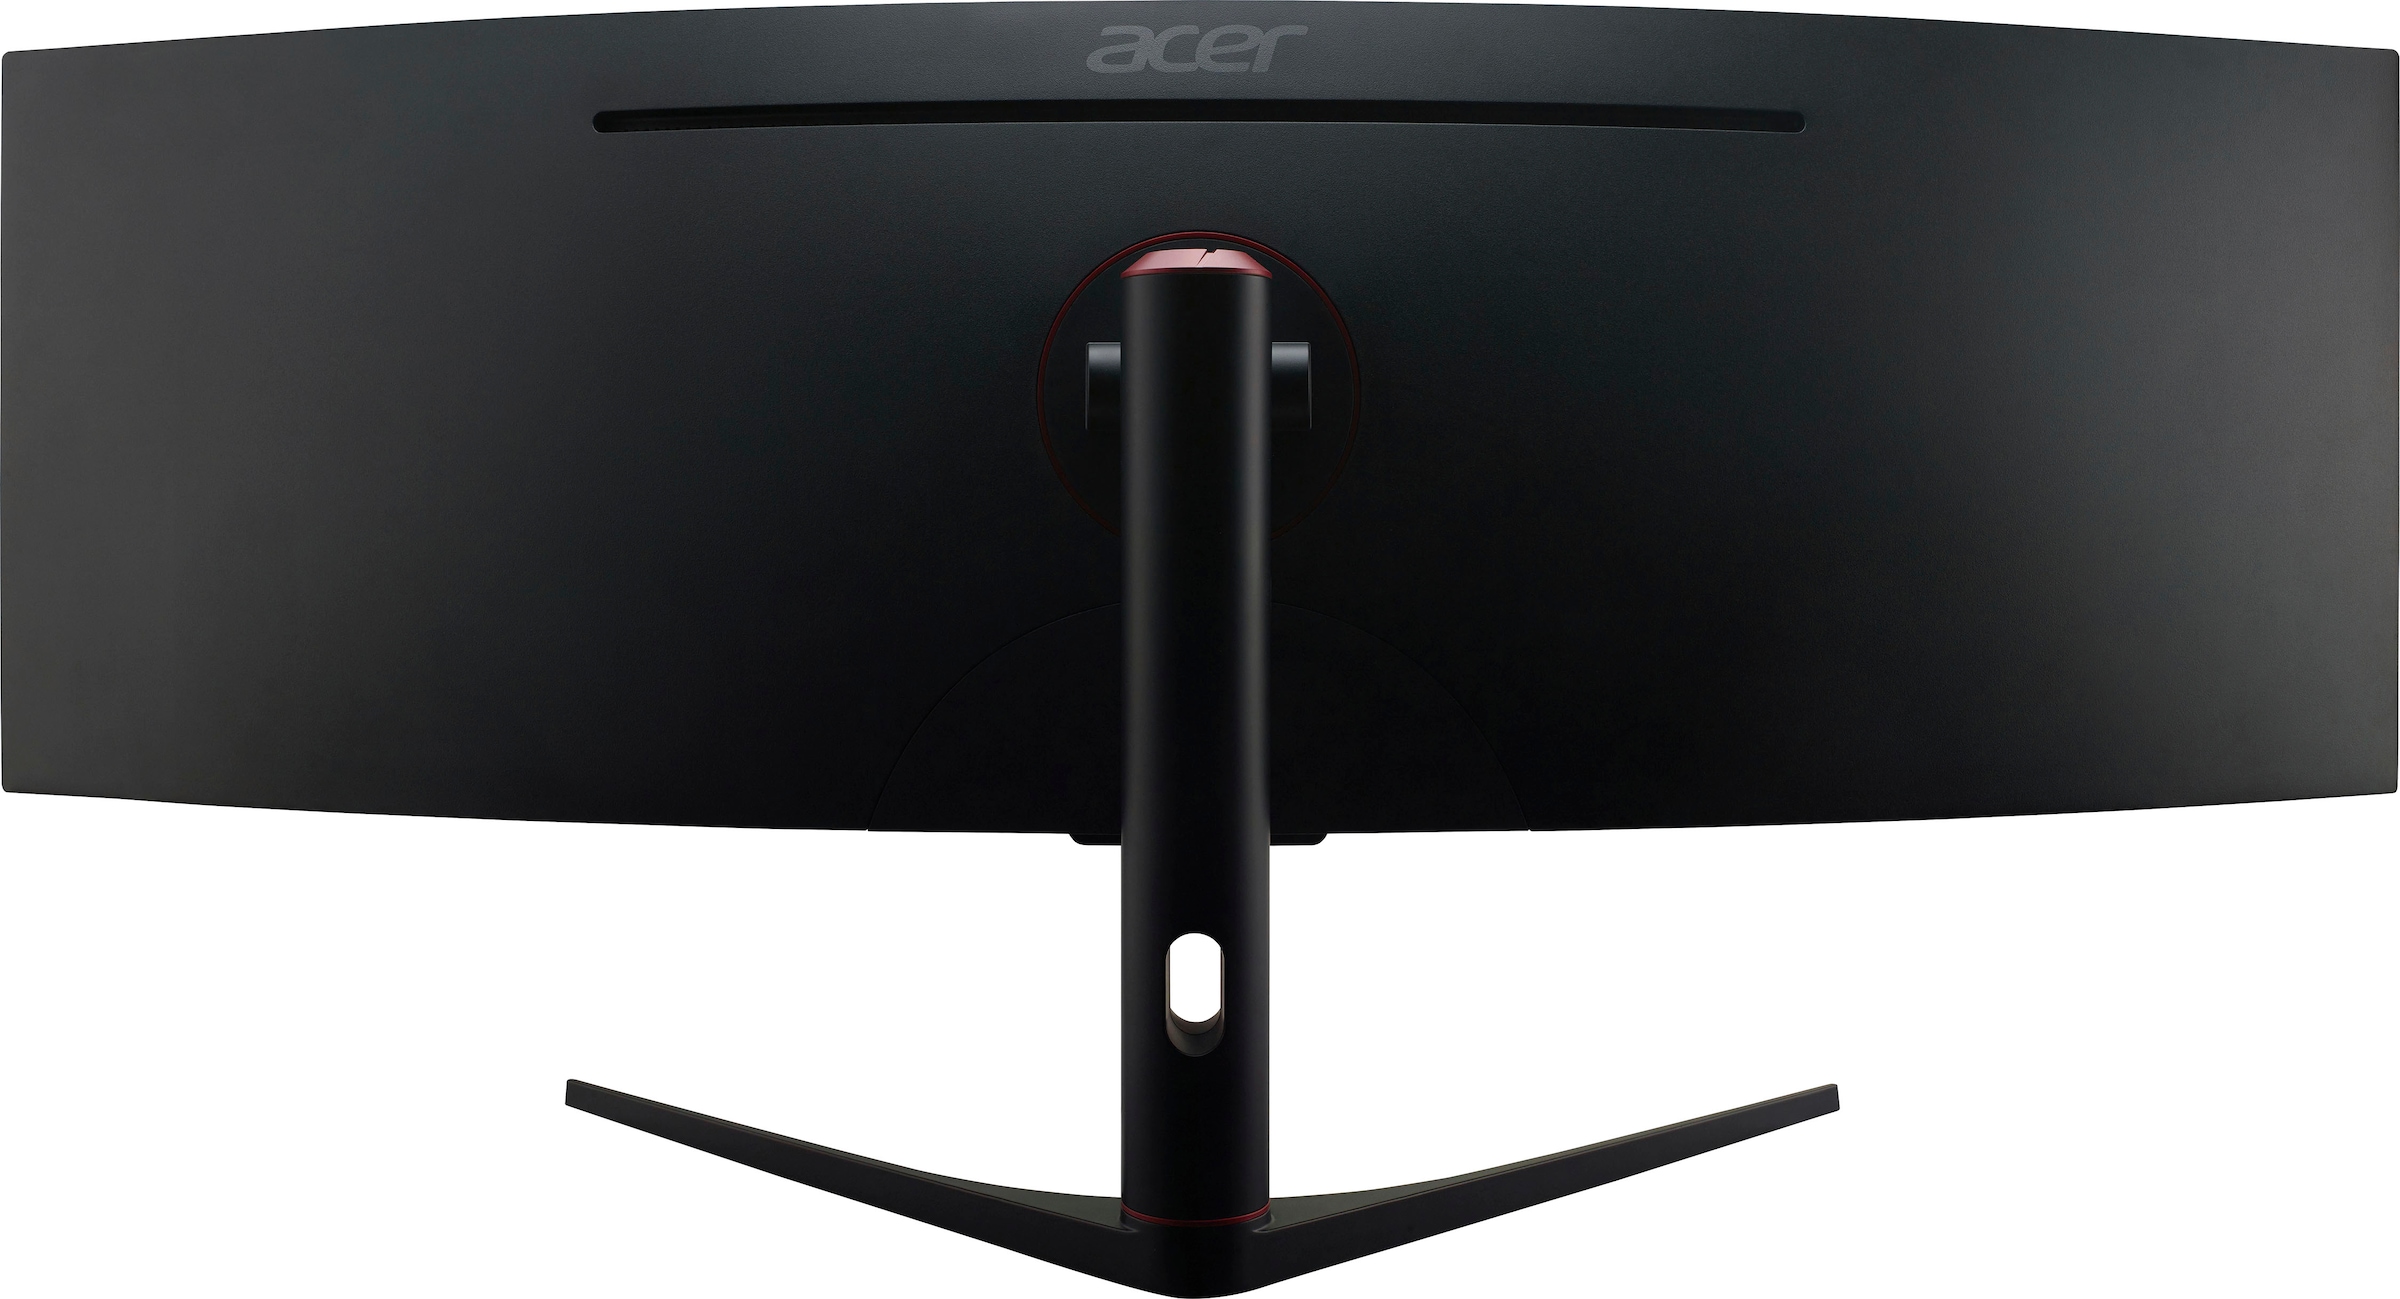 Acer Curved-Gaming-LED-Monitor »Nitro EI491CURS«, 124 cm/49 Zoll, 5120 x 1440 px, DQHD, 4 ms Reaktionszeit, 120 Hz